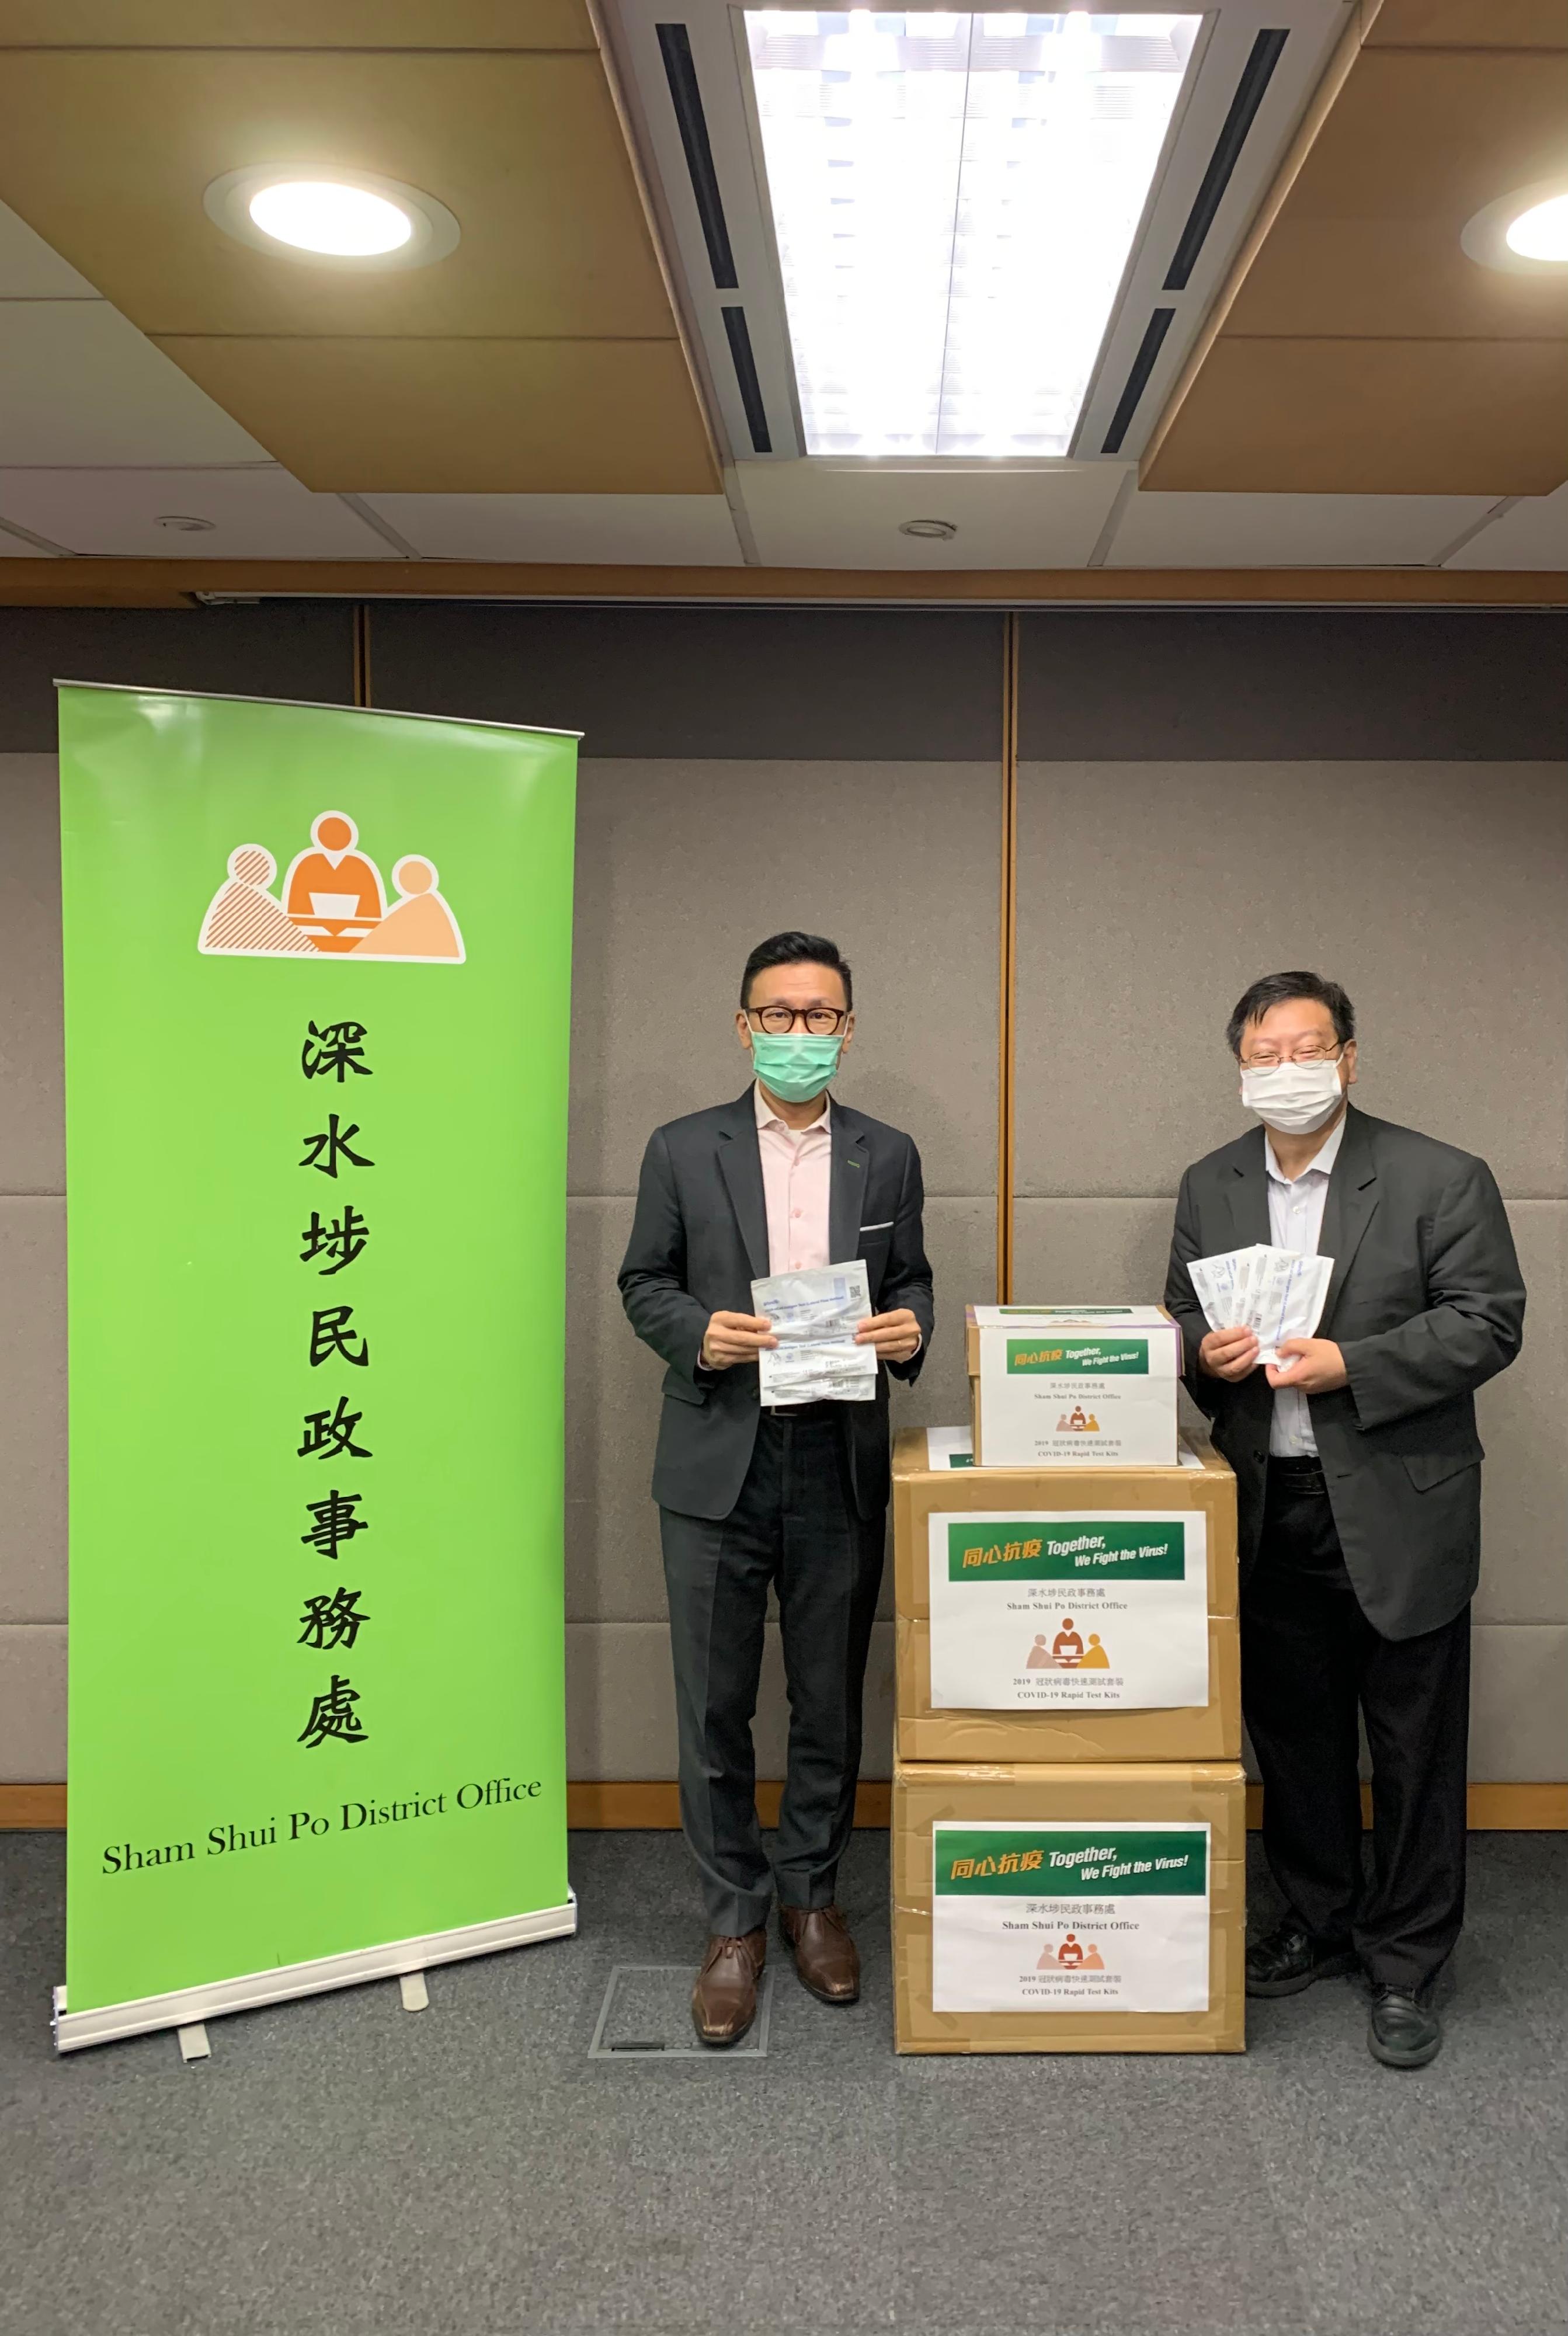 The Sham Shui Po District Office today (July 6) distributed COVID-19 rapid test kits to households, cleansing workers and property management staff living and working in Phase 1, 2, 3 and 7 of Mei Foo Sun Chuen for voluntary testing through the property management company.

